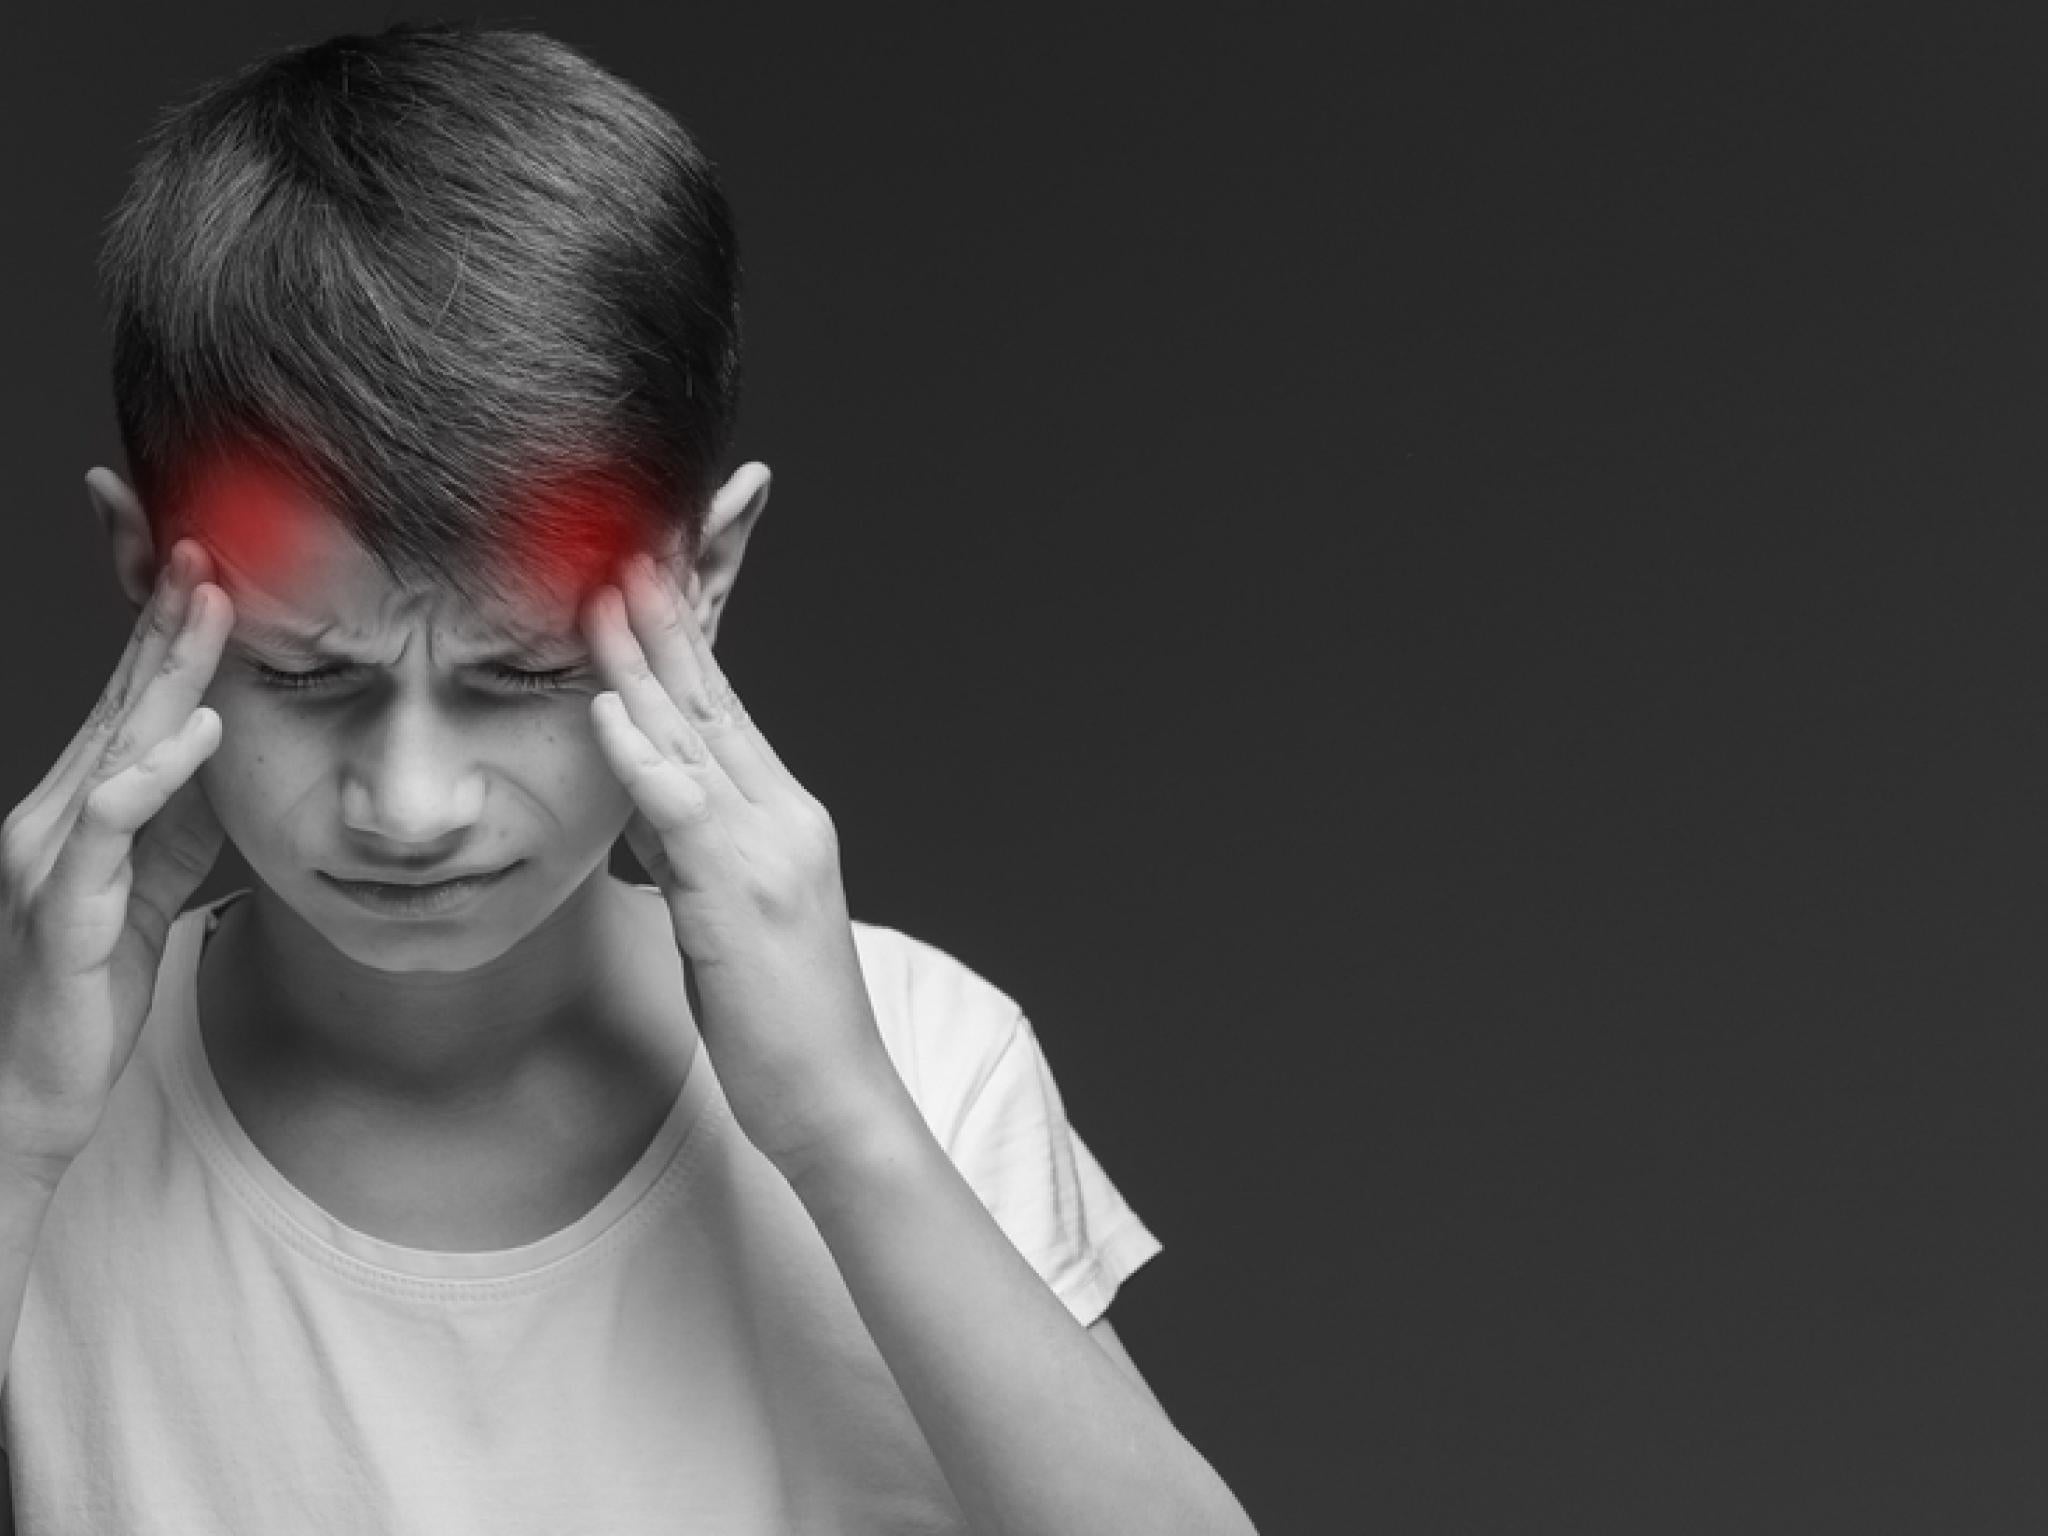  tevas-migraine-treatment-found-effective-for-children-as-young-as-6 